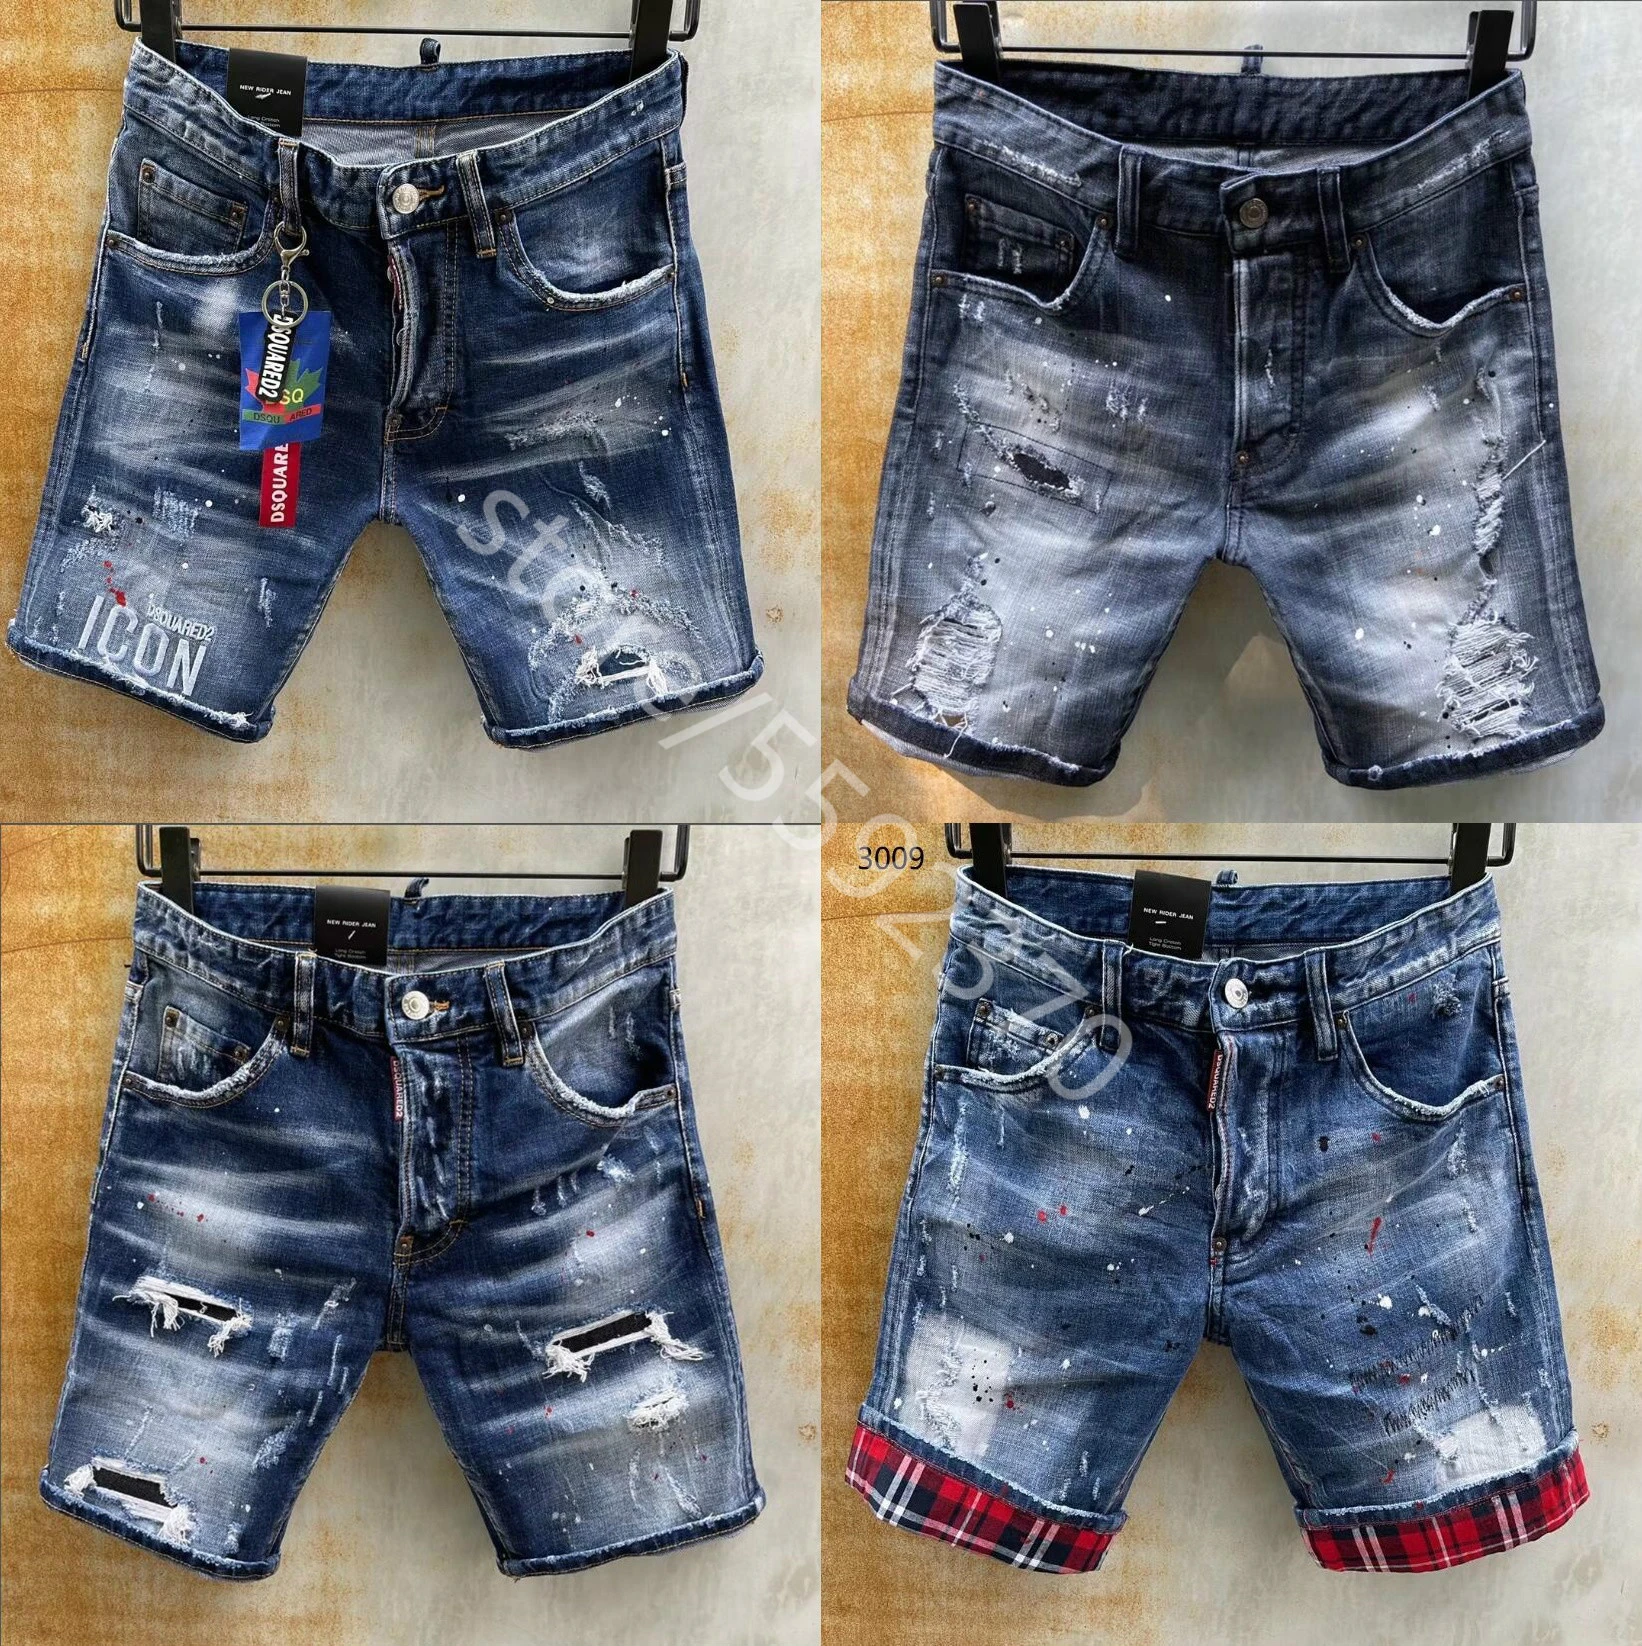 Summer dsquared2 Novelty Men Elastic Short Jeans Fashion Casual Slim Fit  High Quality Elastic Cowboy Male Shorts Brand Clothing|Jeans| - AliExpress